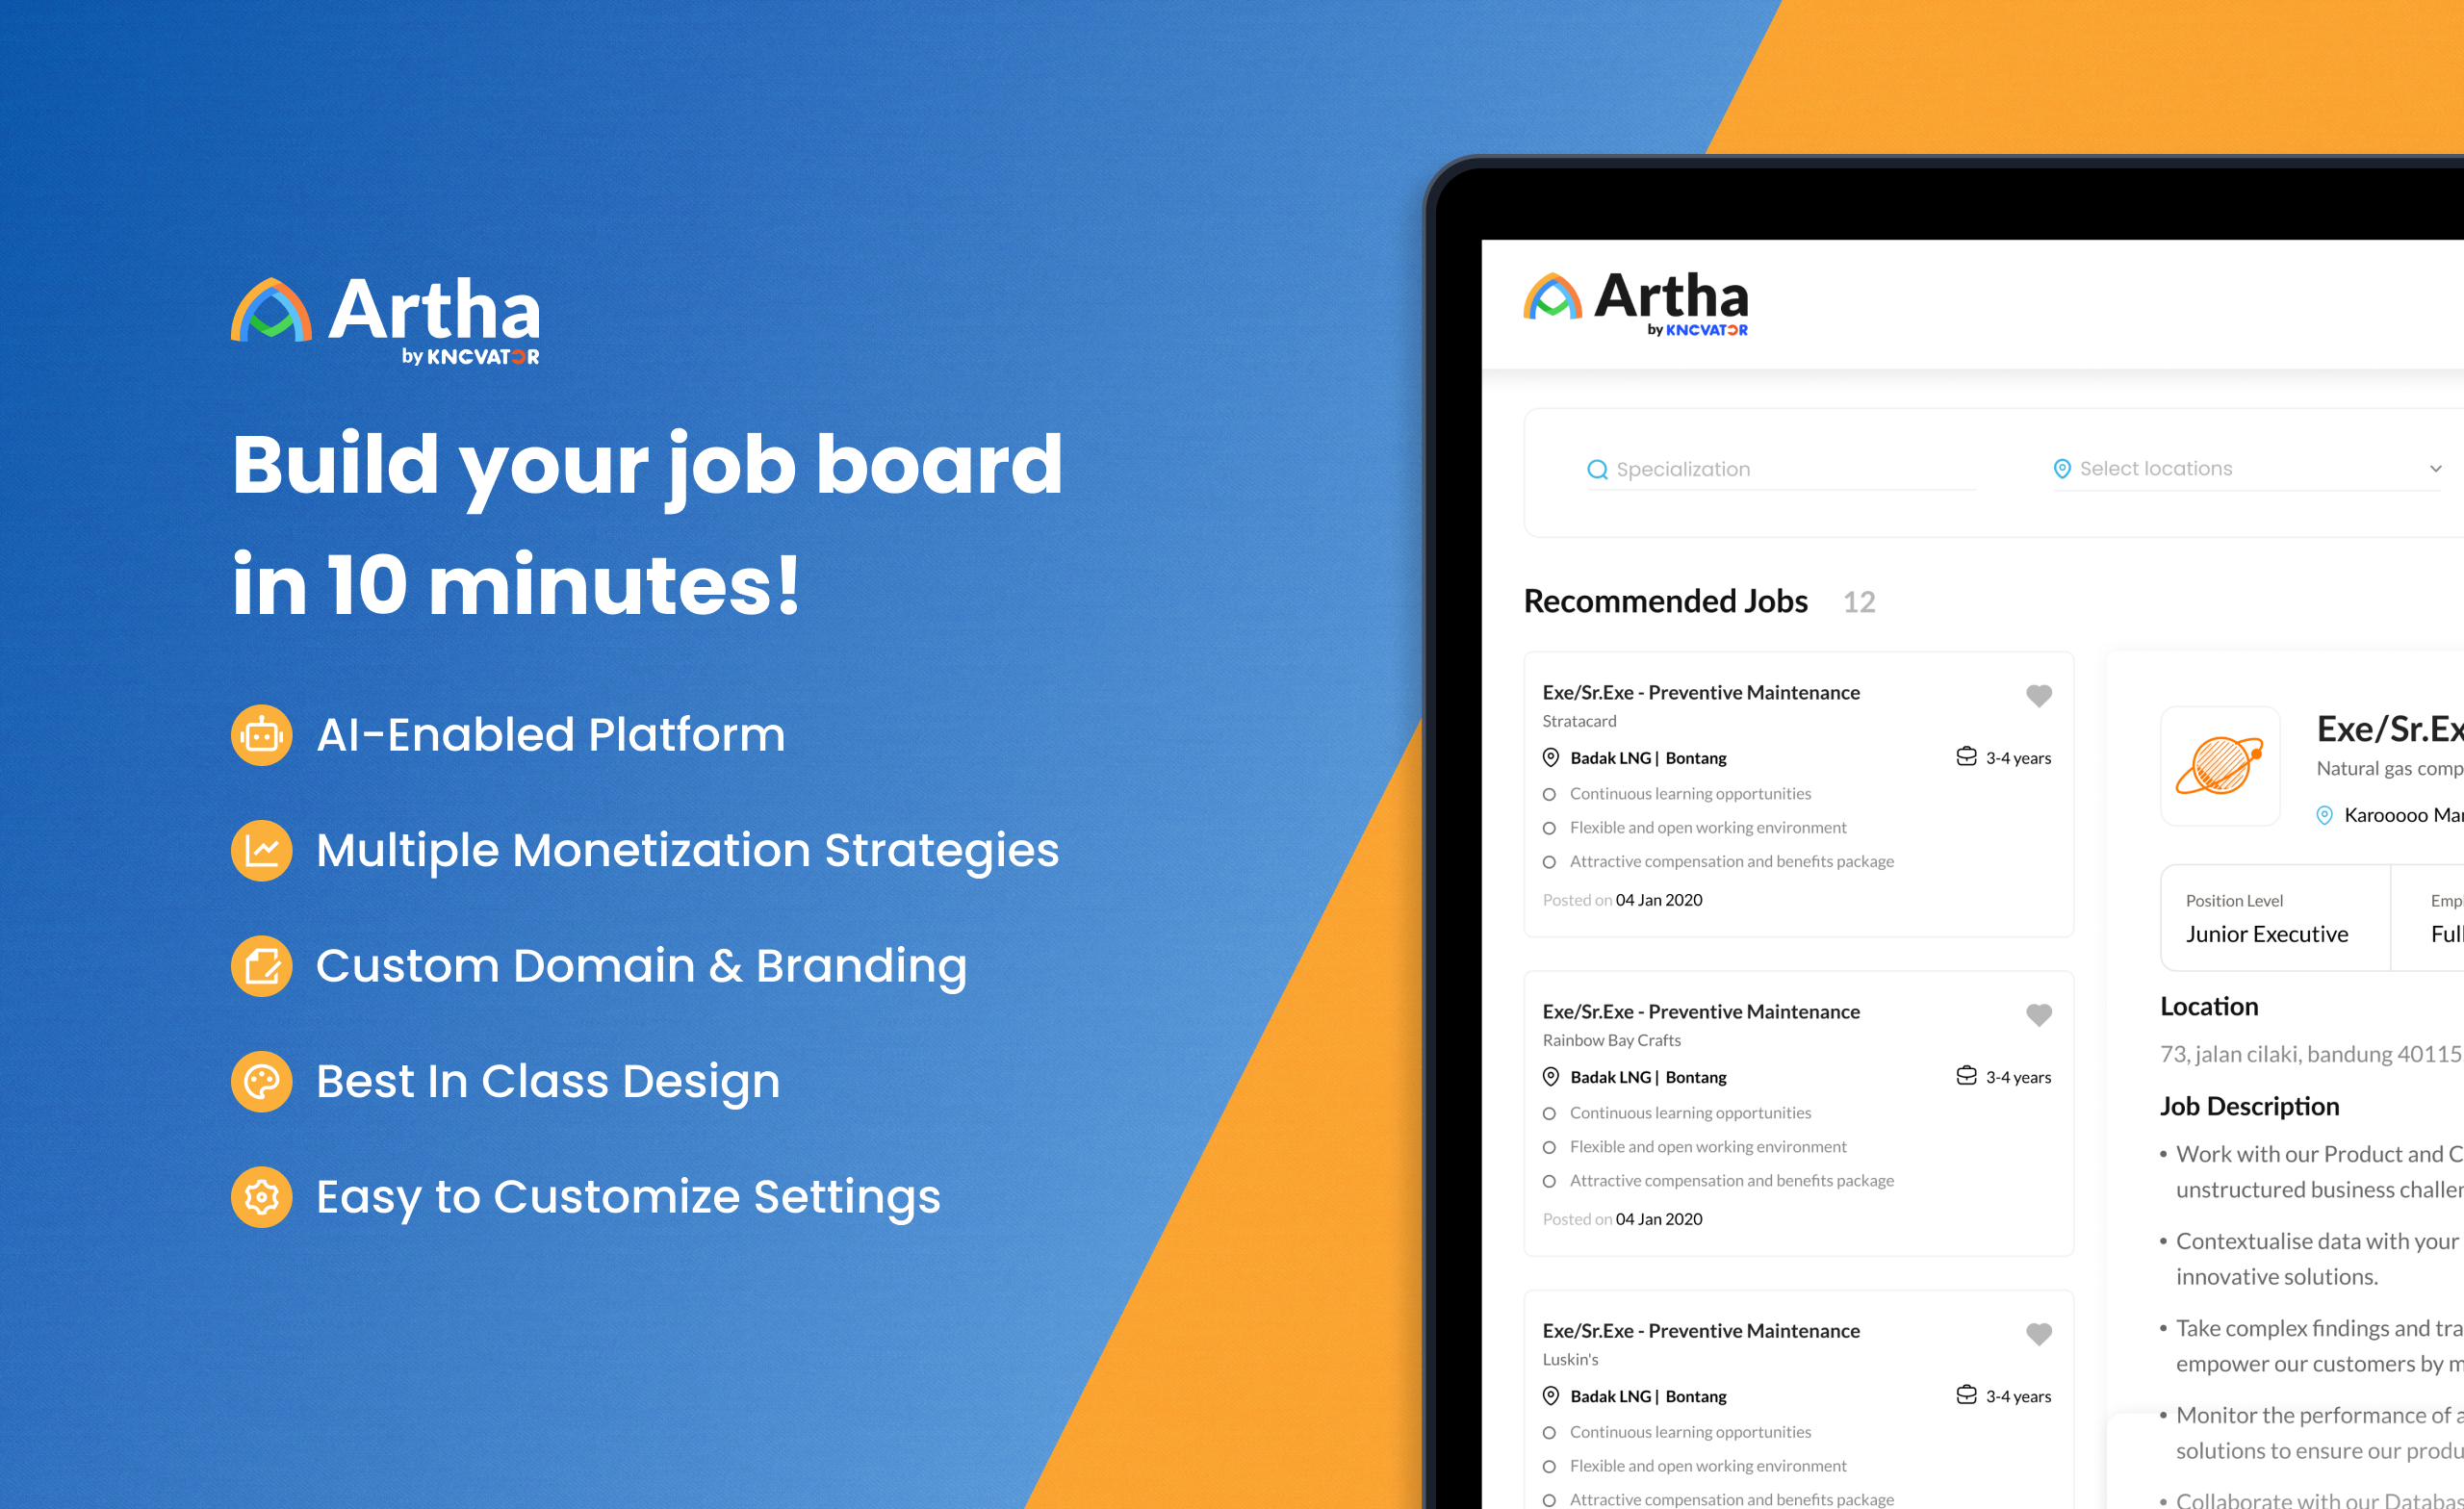 Build your job board in 10 minutes!
AI-Enabled Platform
Multiple Monetization Strategies
Custom Domain & Branding
Best In Class Design
Easy to Customize Settings